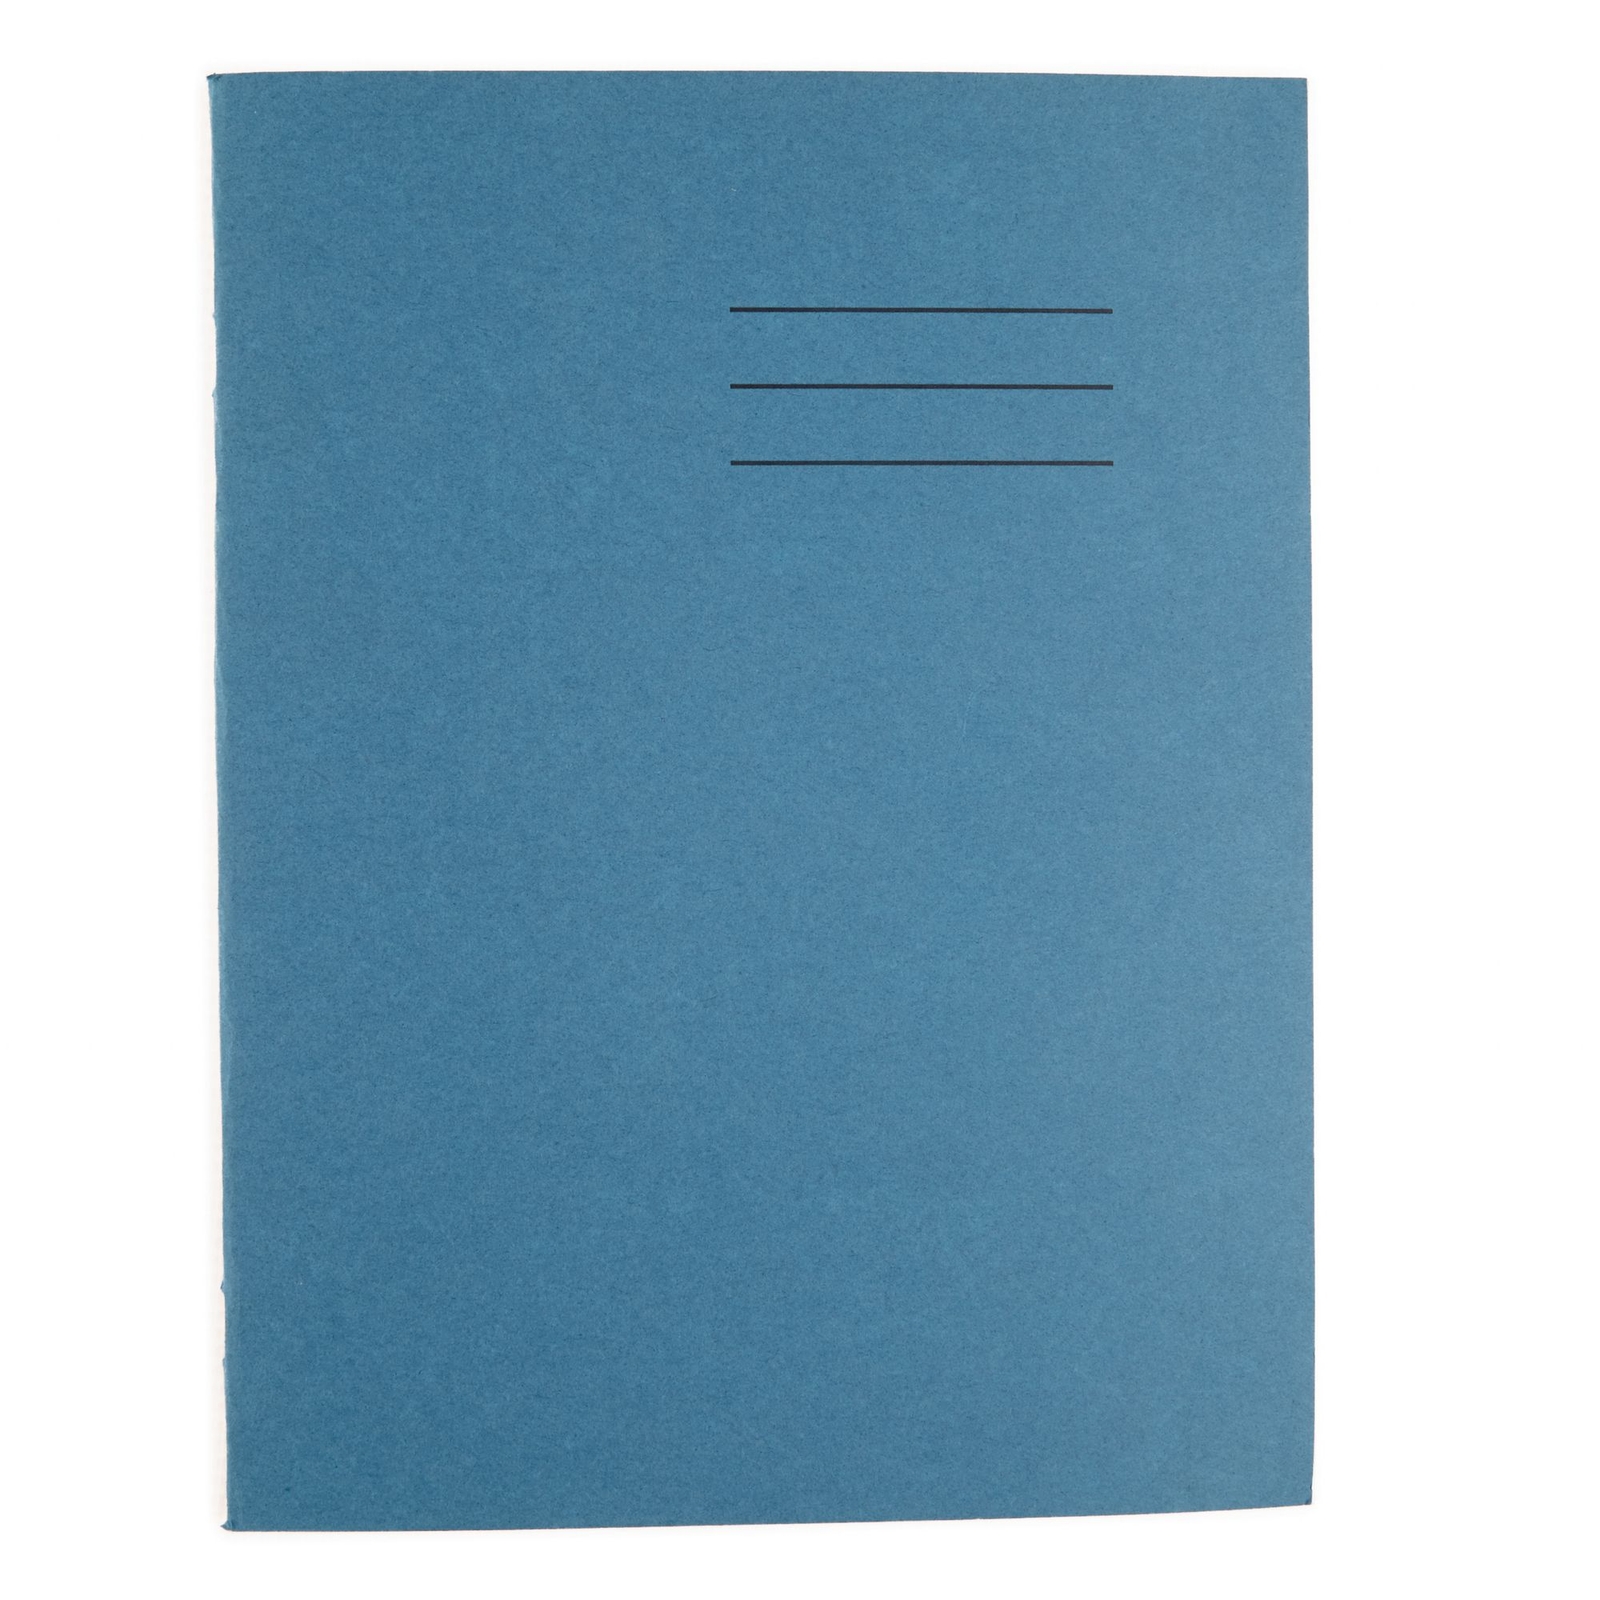 A4 Exercise Book 64 Page, 10mm Sqaured, Light Blue - Pack of 50